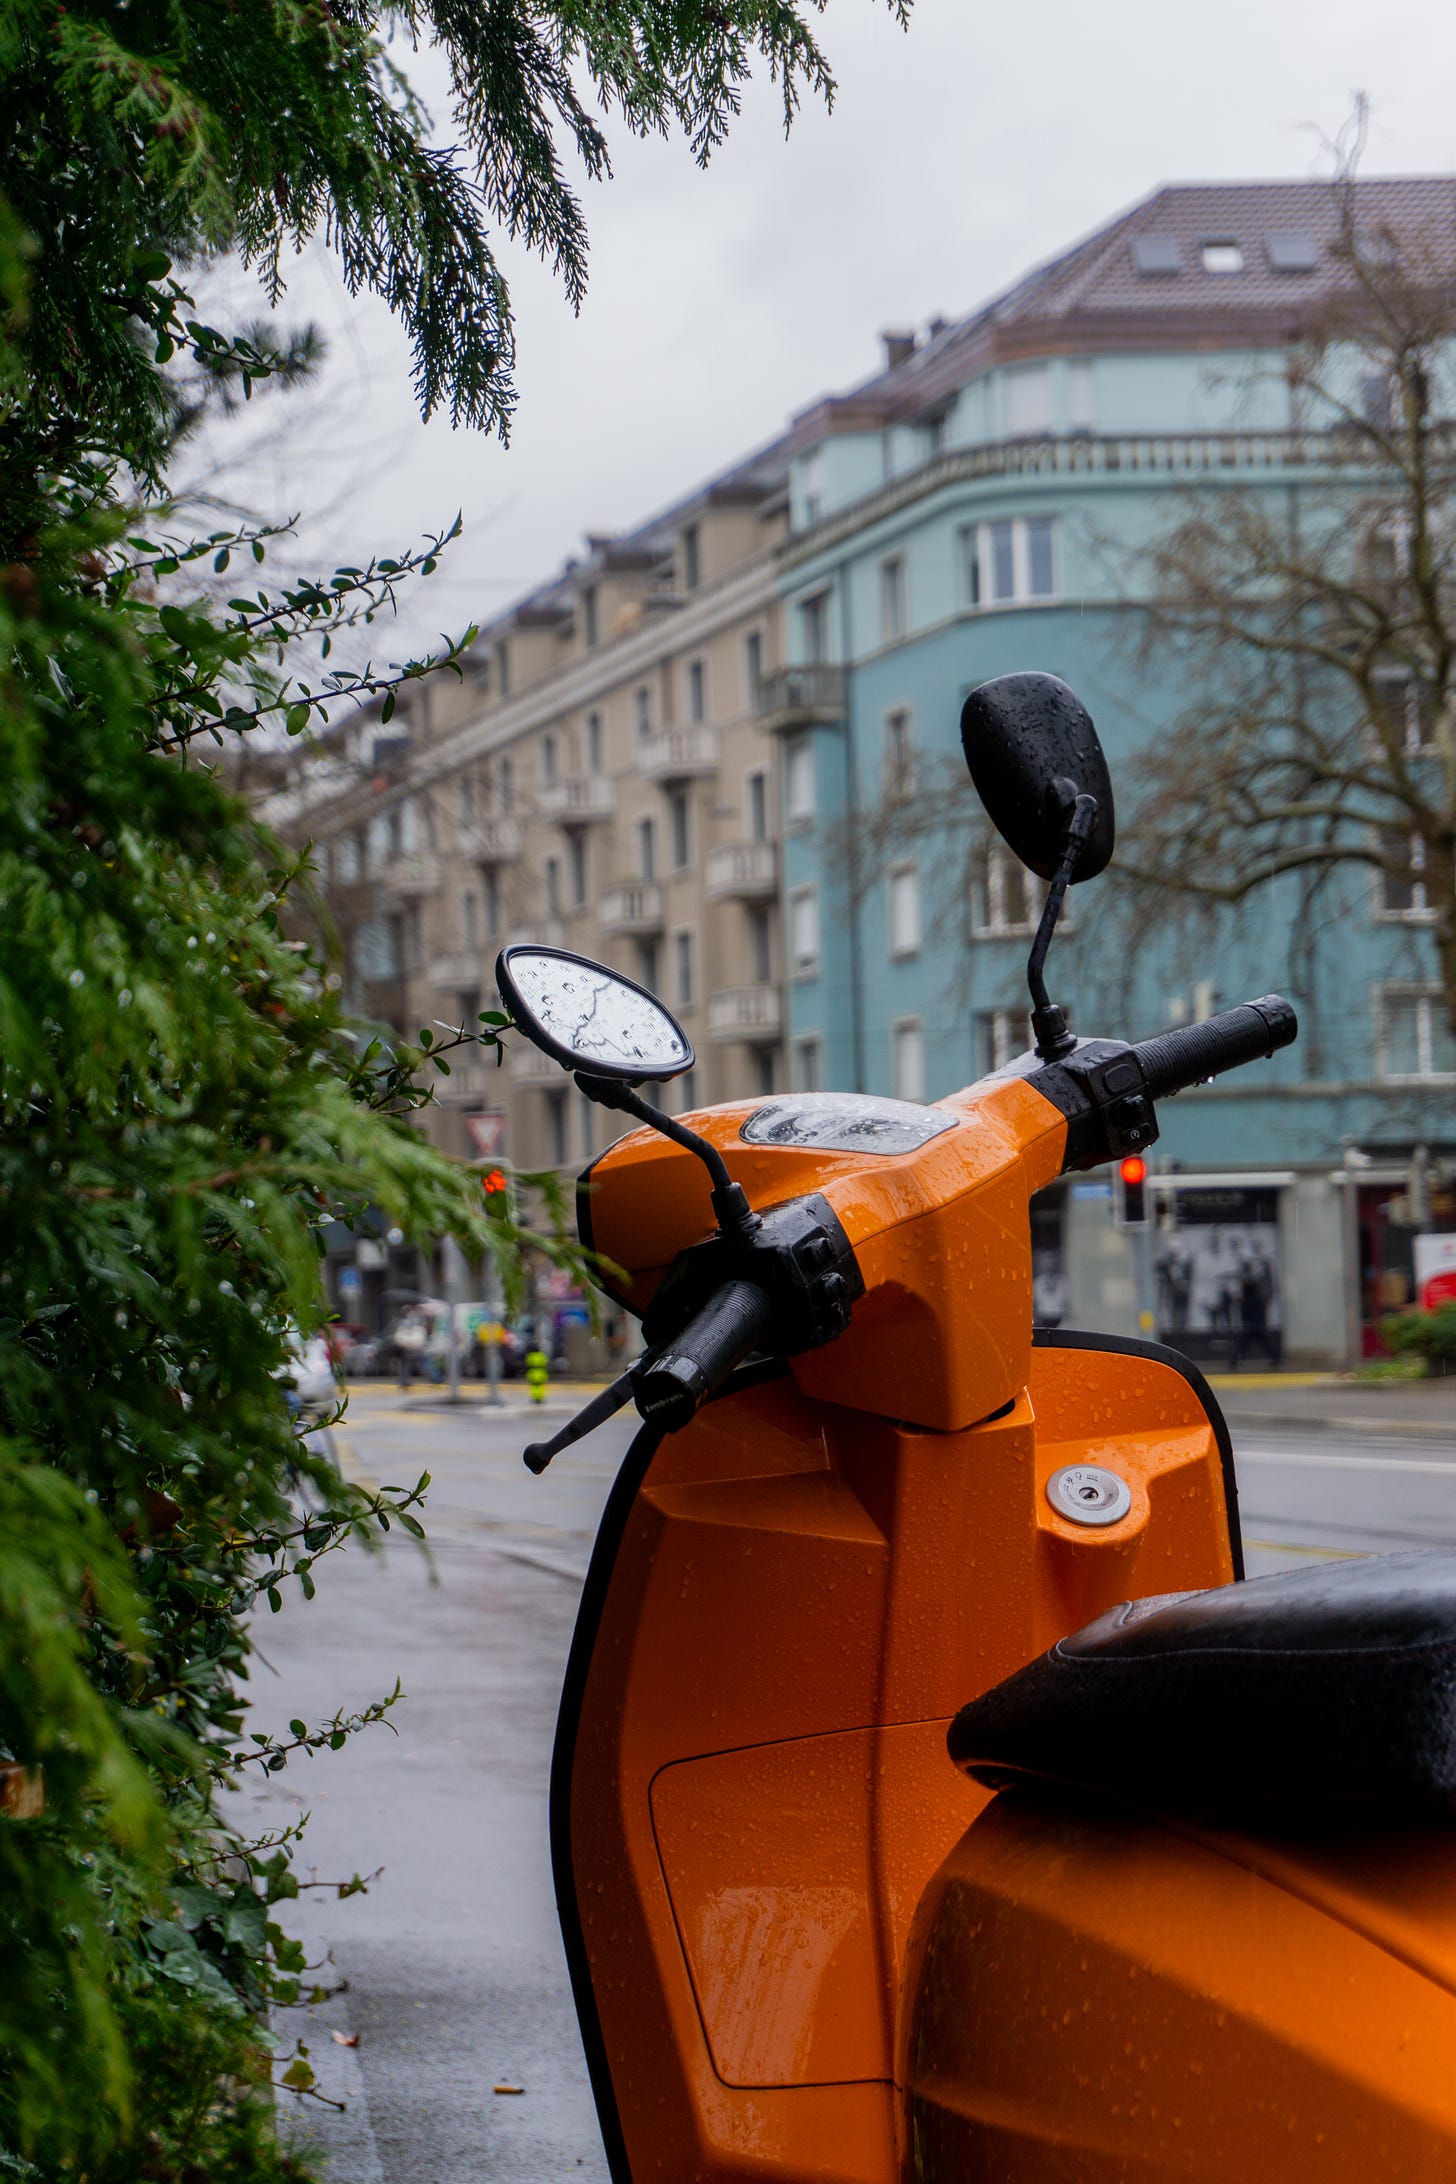 An orange moped in front of a blue building